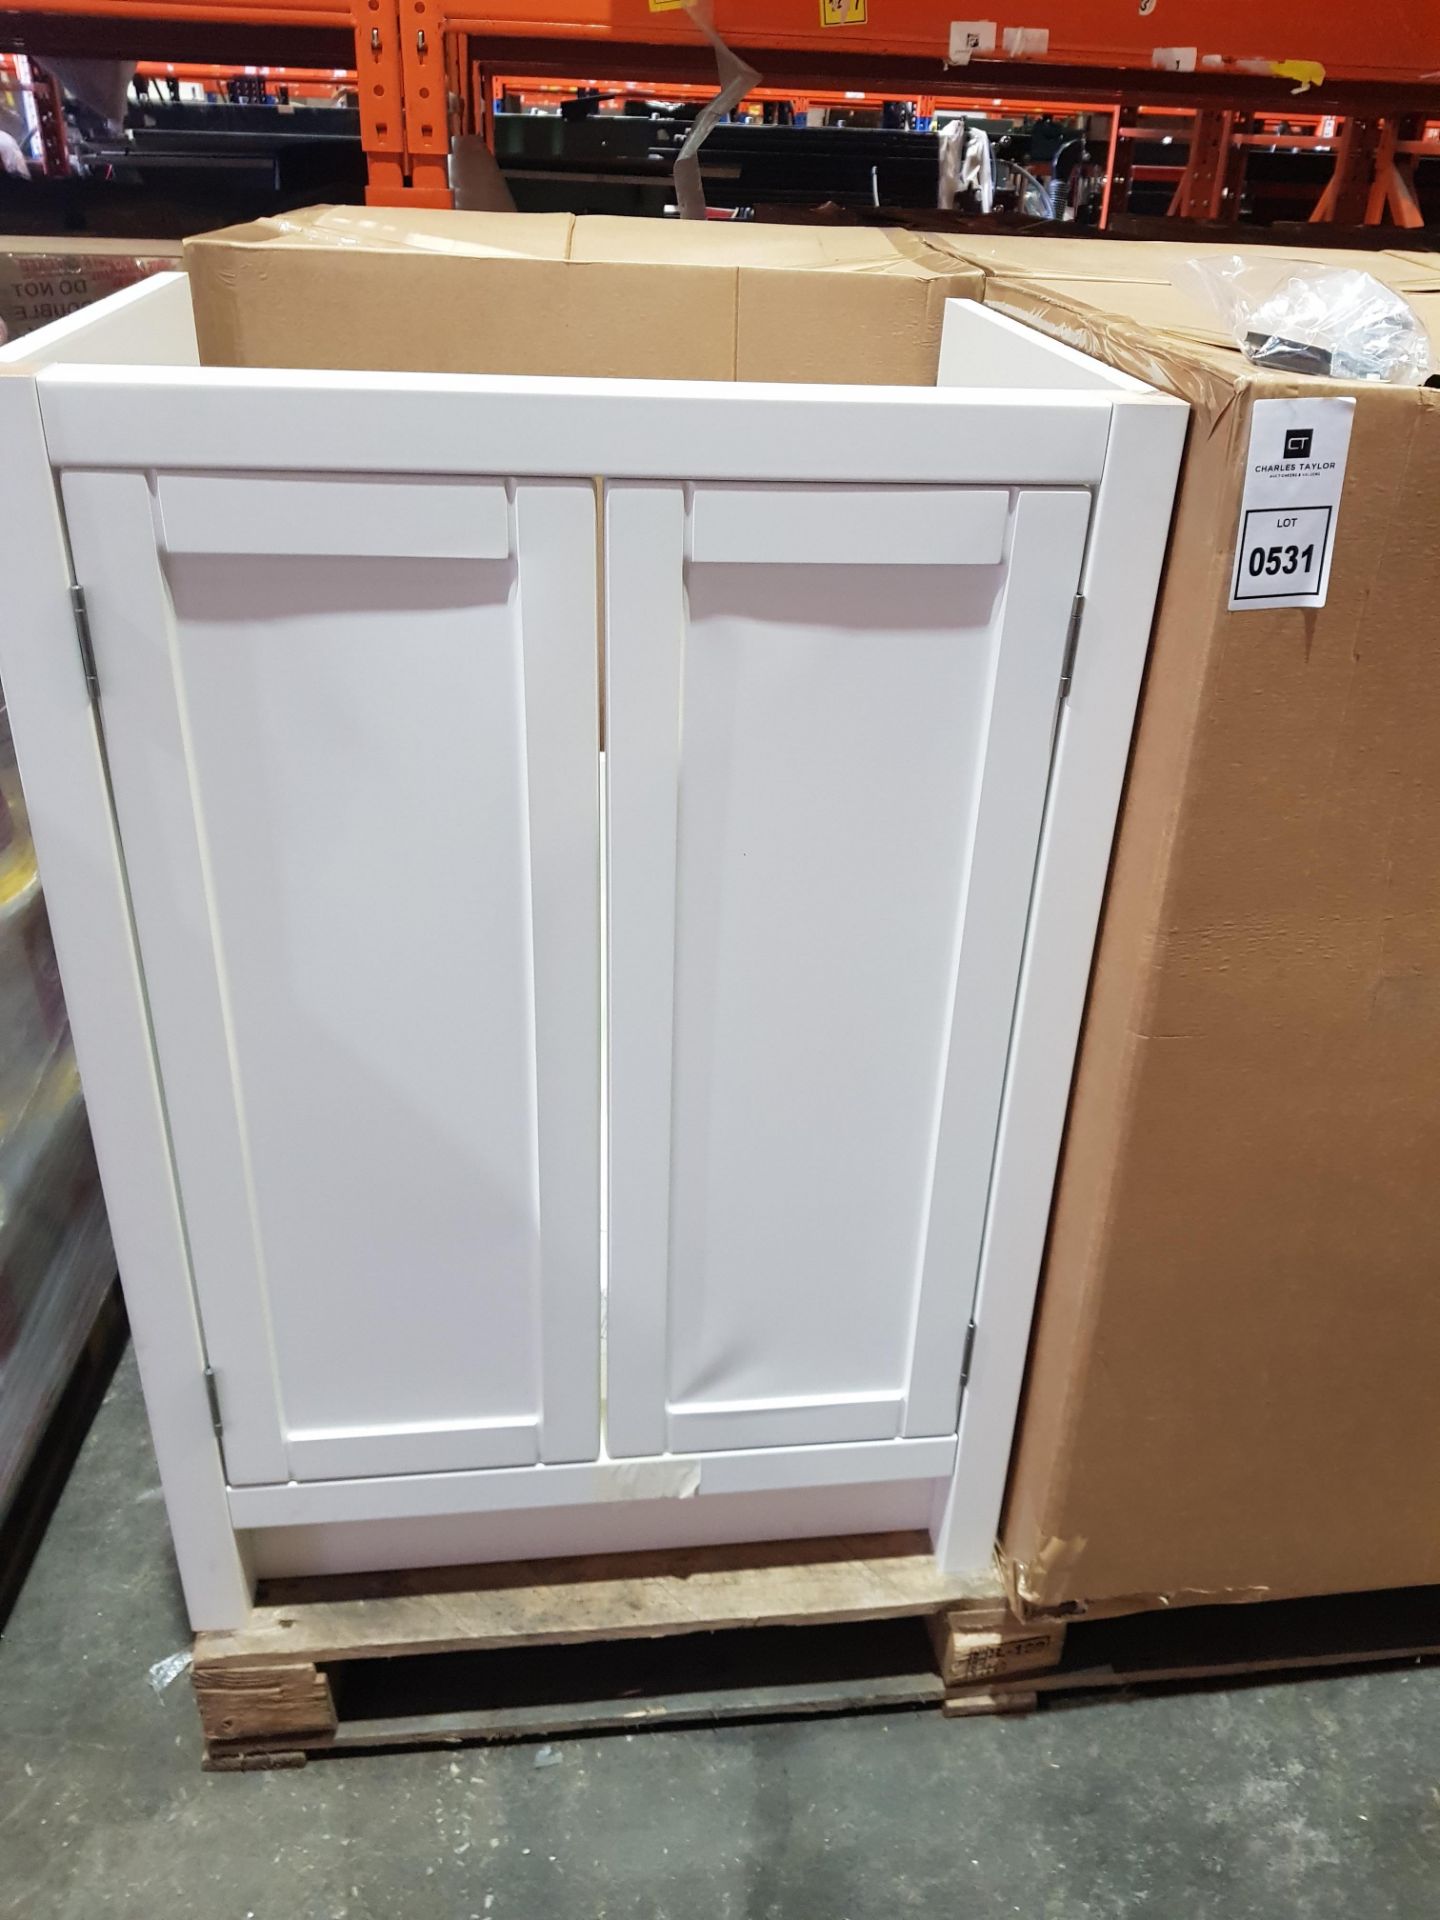 4 X BRAND NEW H & S 600 VANITY UNIT OR UC BASIN - ALL IN WHITE - INCLUDES ALL FIXINGS ( PLEASE